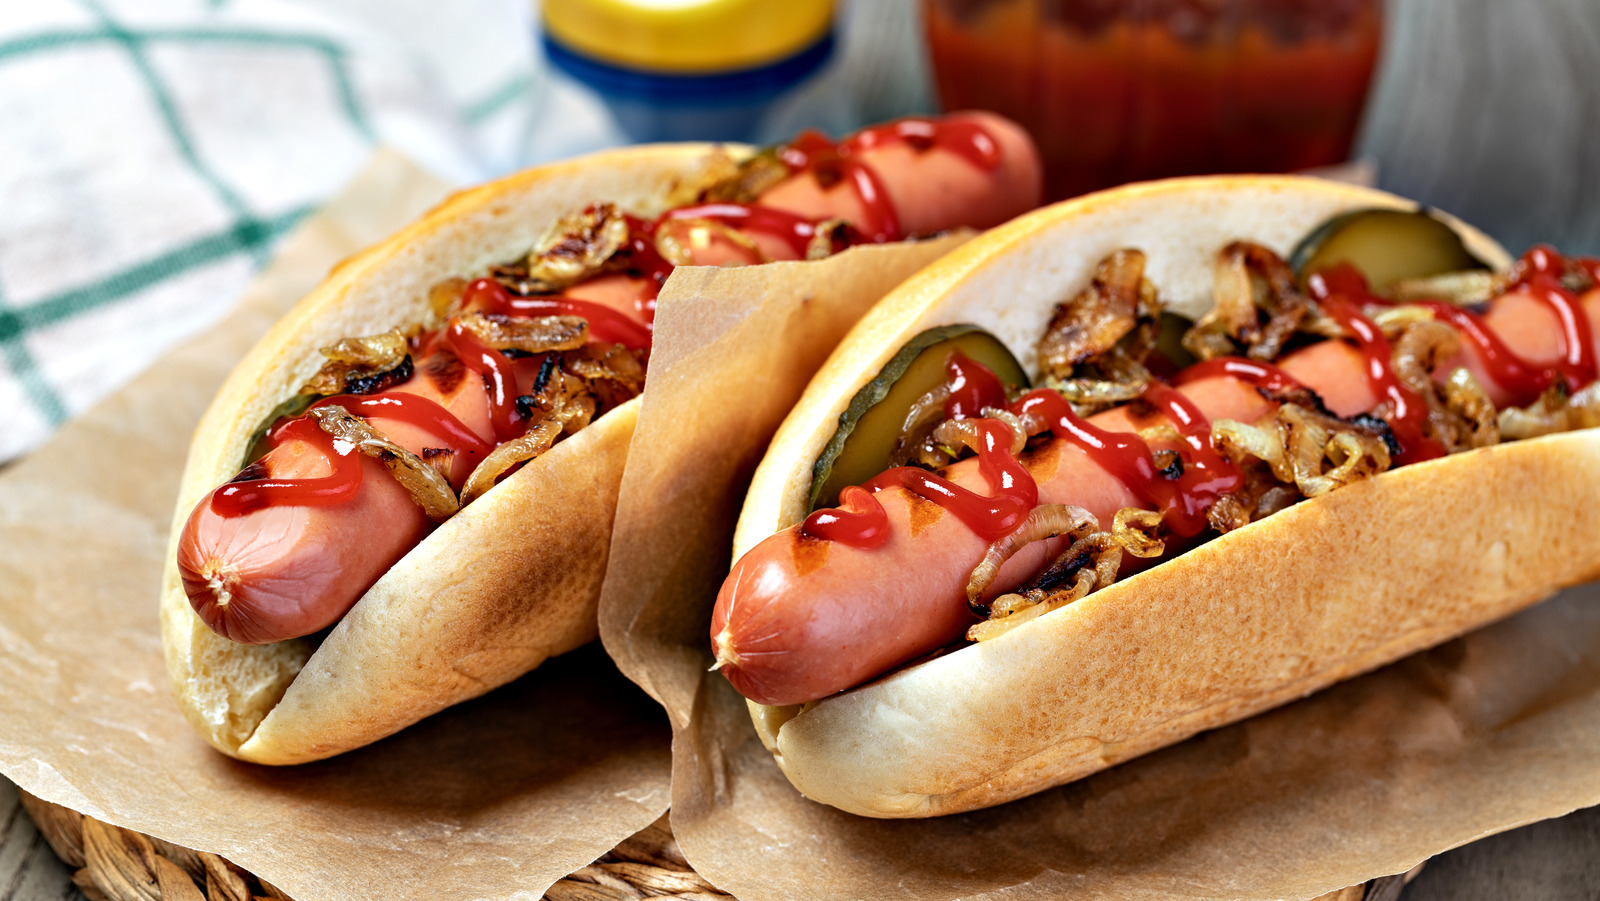 https://www.healthdigest.com/img/gallery/this-is-what-happens-if-you-eat-a-hot-dog-every-day/l-intro-1631564965.jpg